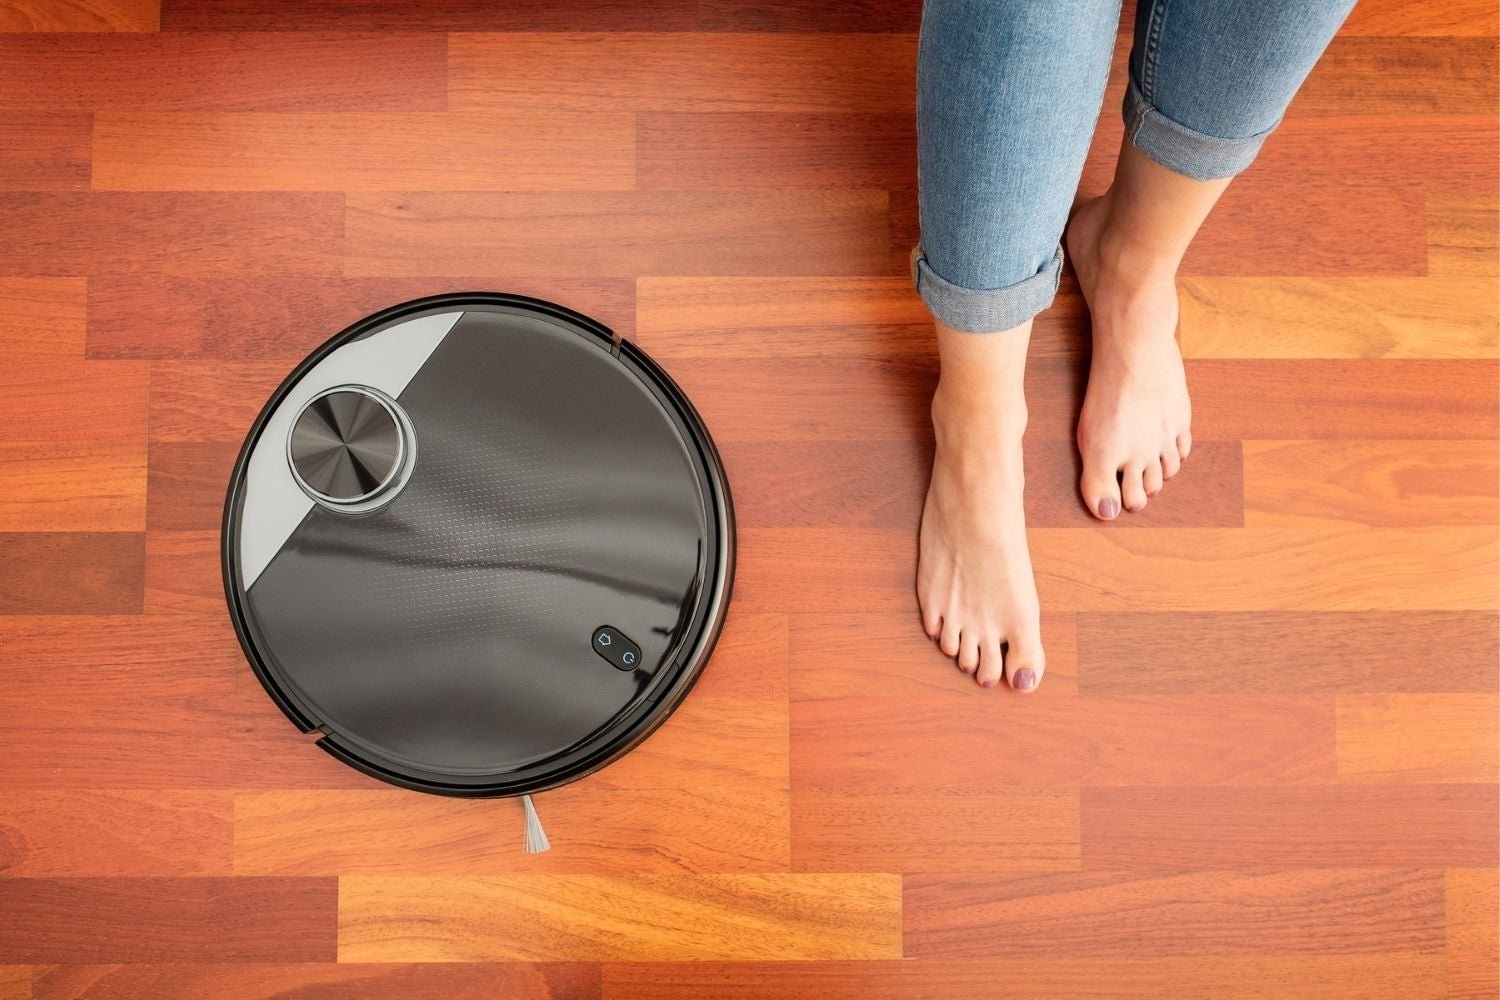 The Best Prime Day Roomba Deals: Robot Vacuum Deals for Prime Day 2021